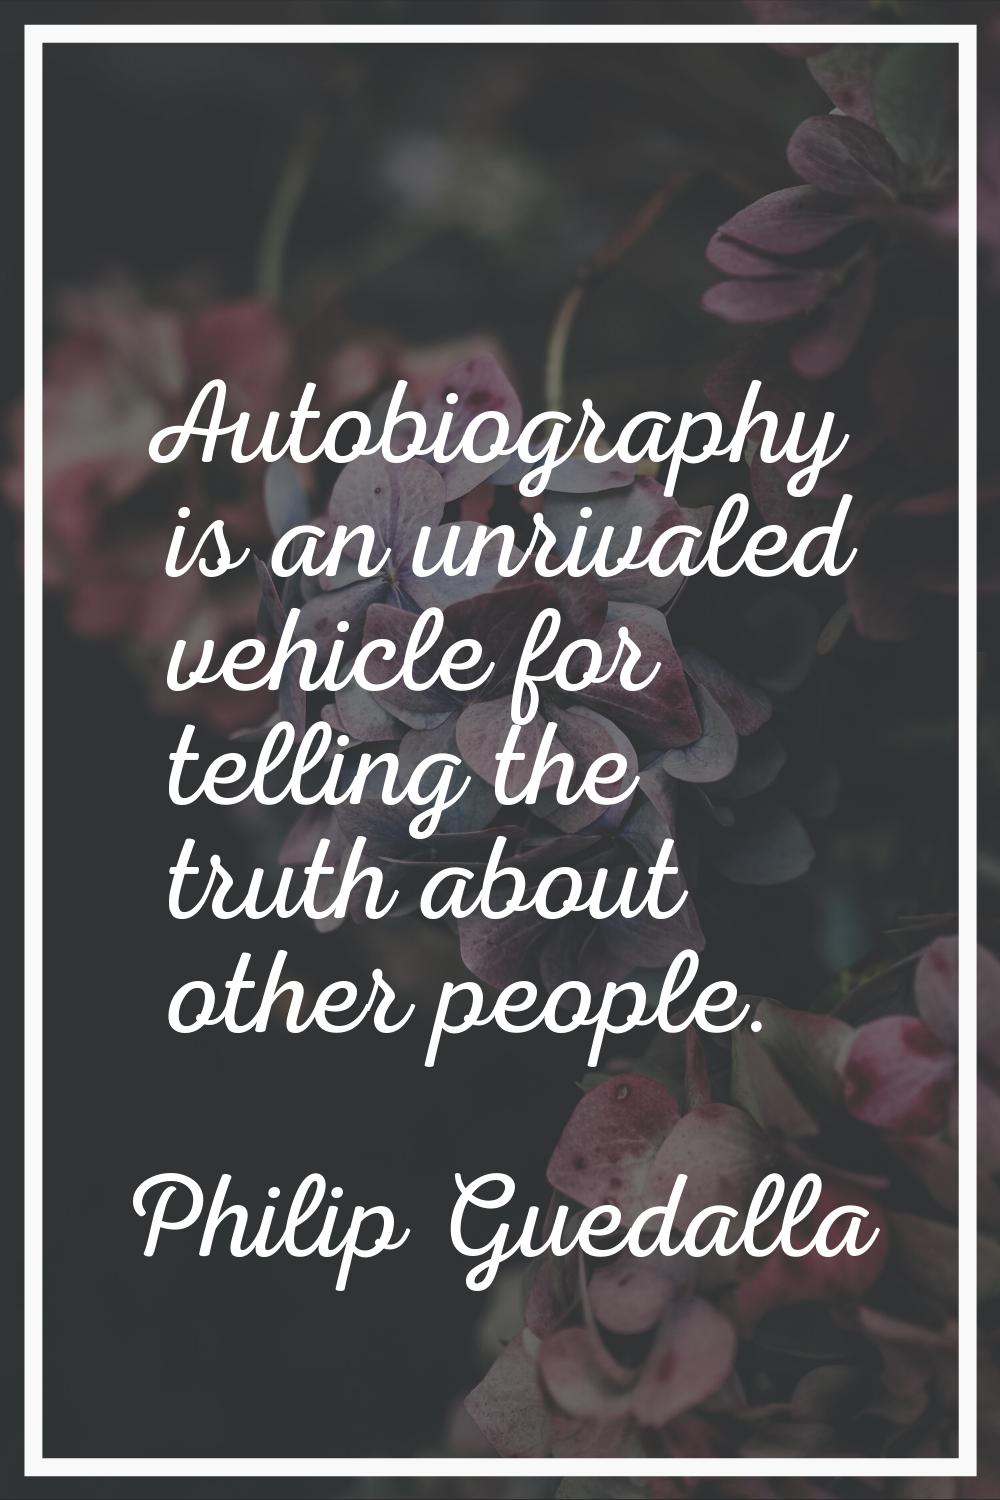 Autobiography is an unrivaled vehicle for telling the truth about other people.